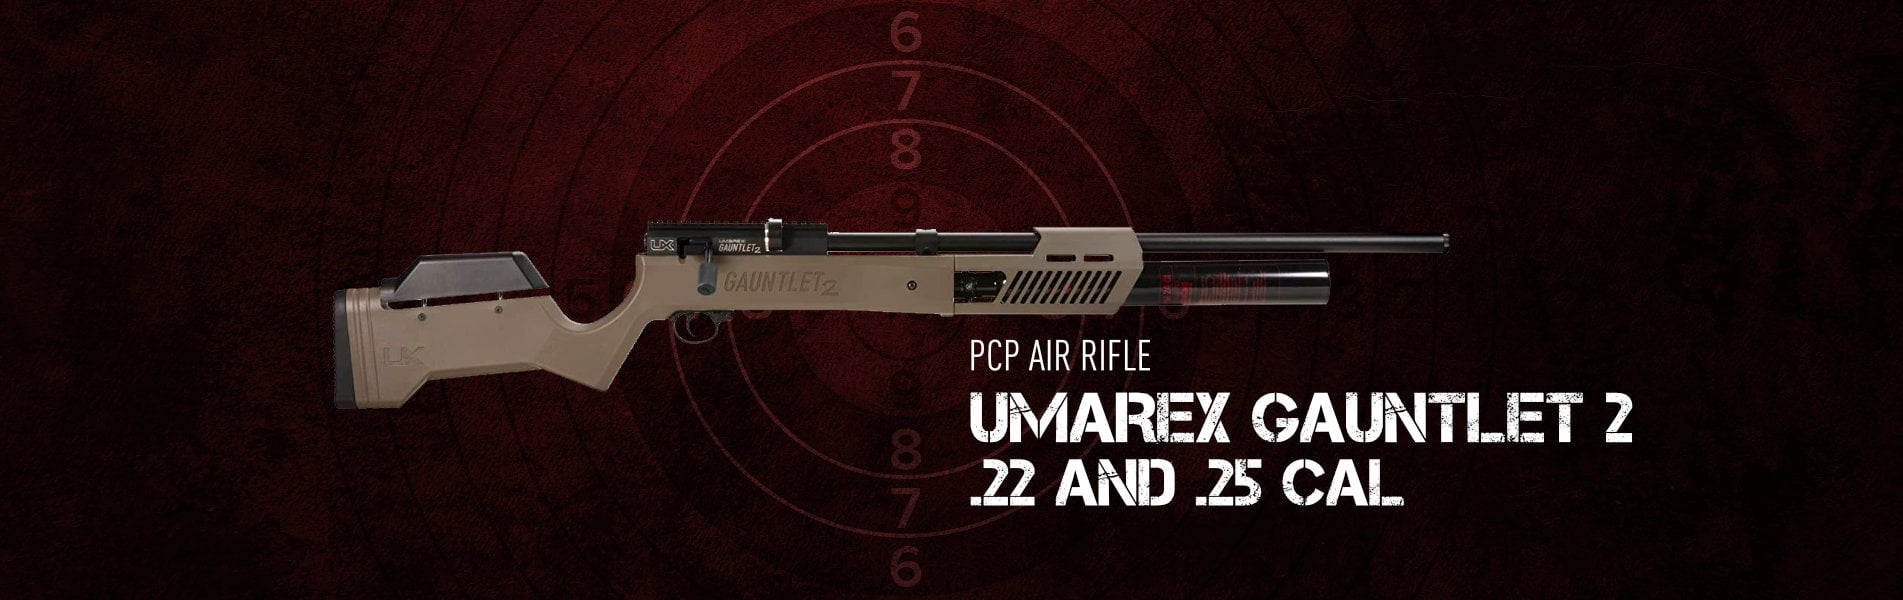 NEW Umarex Gauntlet 2 PCP air rifle .22 and .25 cal